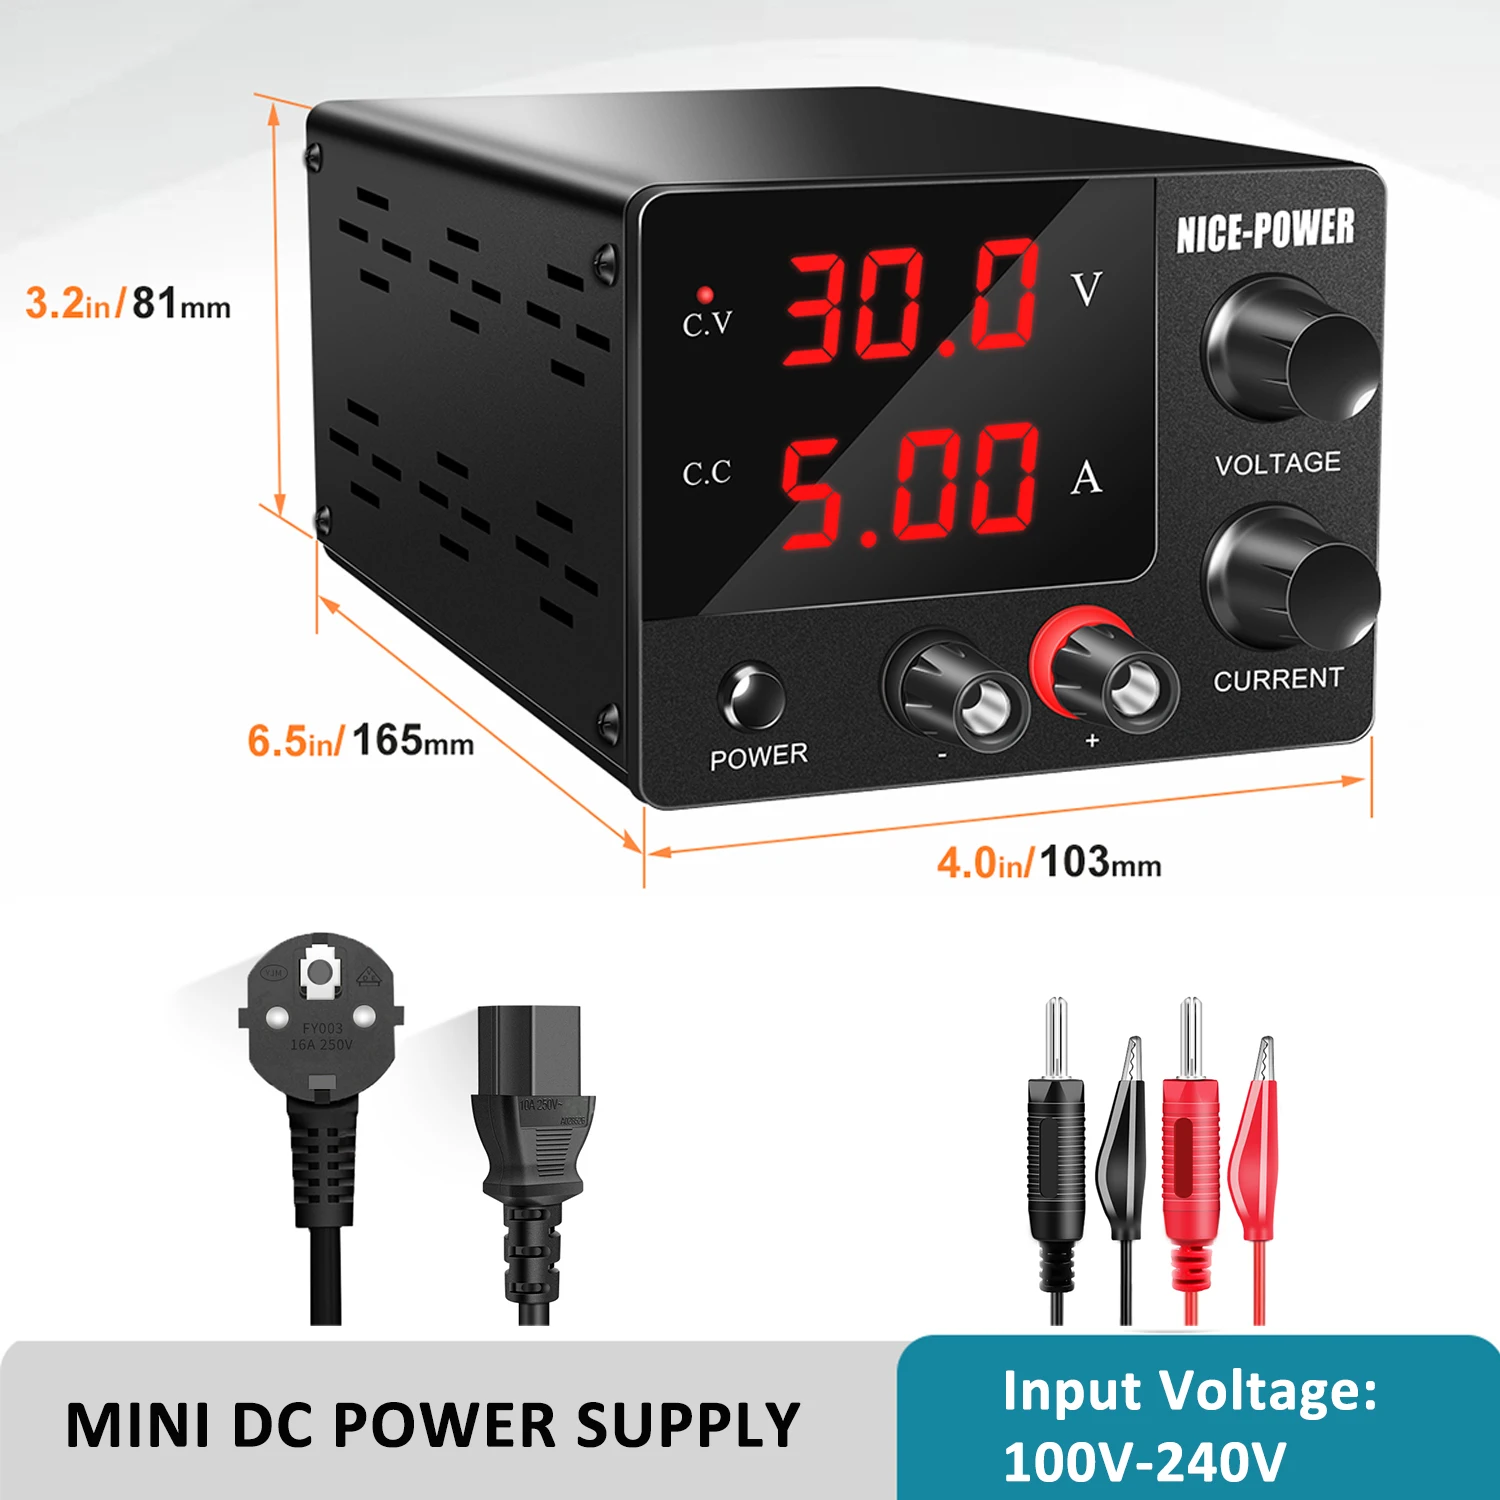 NICE-POWER Super Mini DC Laboratory Power Supply Variable Stablized Voltage Regulator Bench Source 30V 5A For Electronics Repair